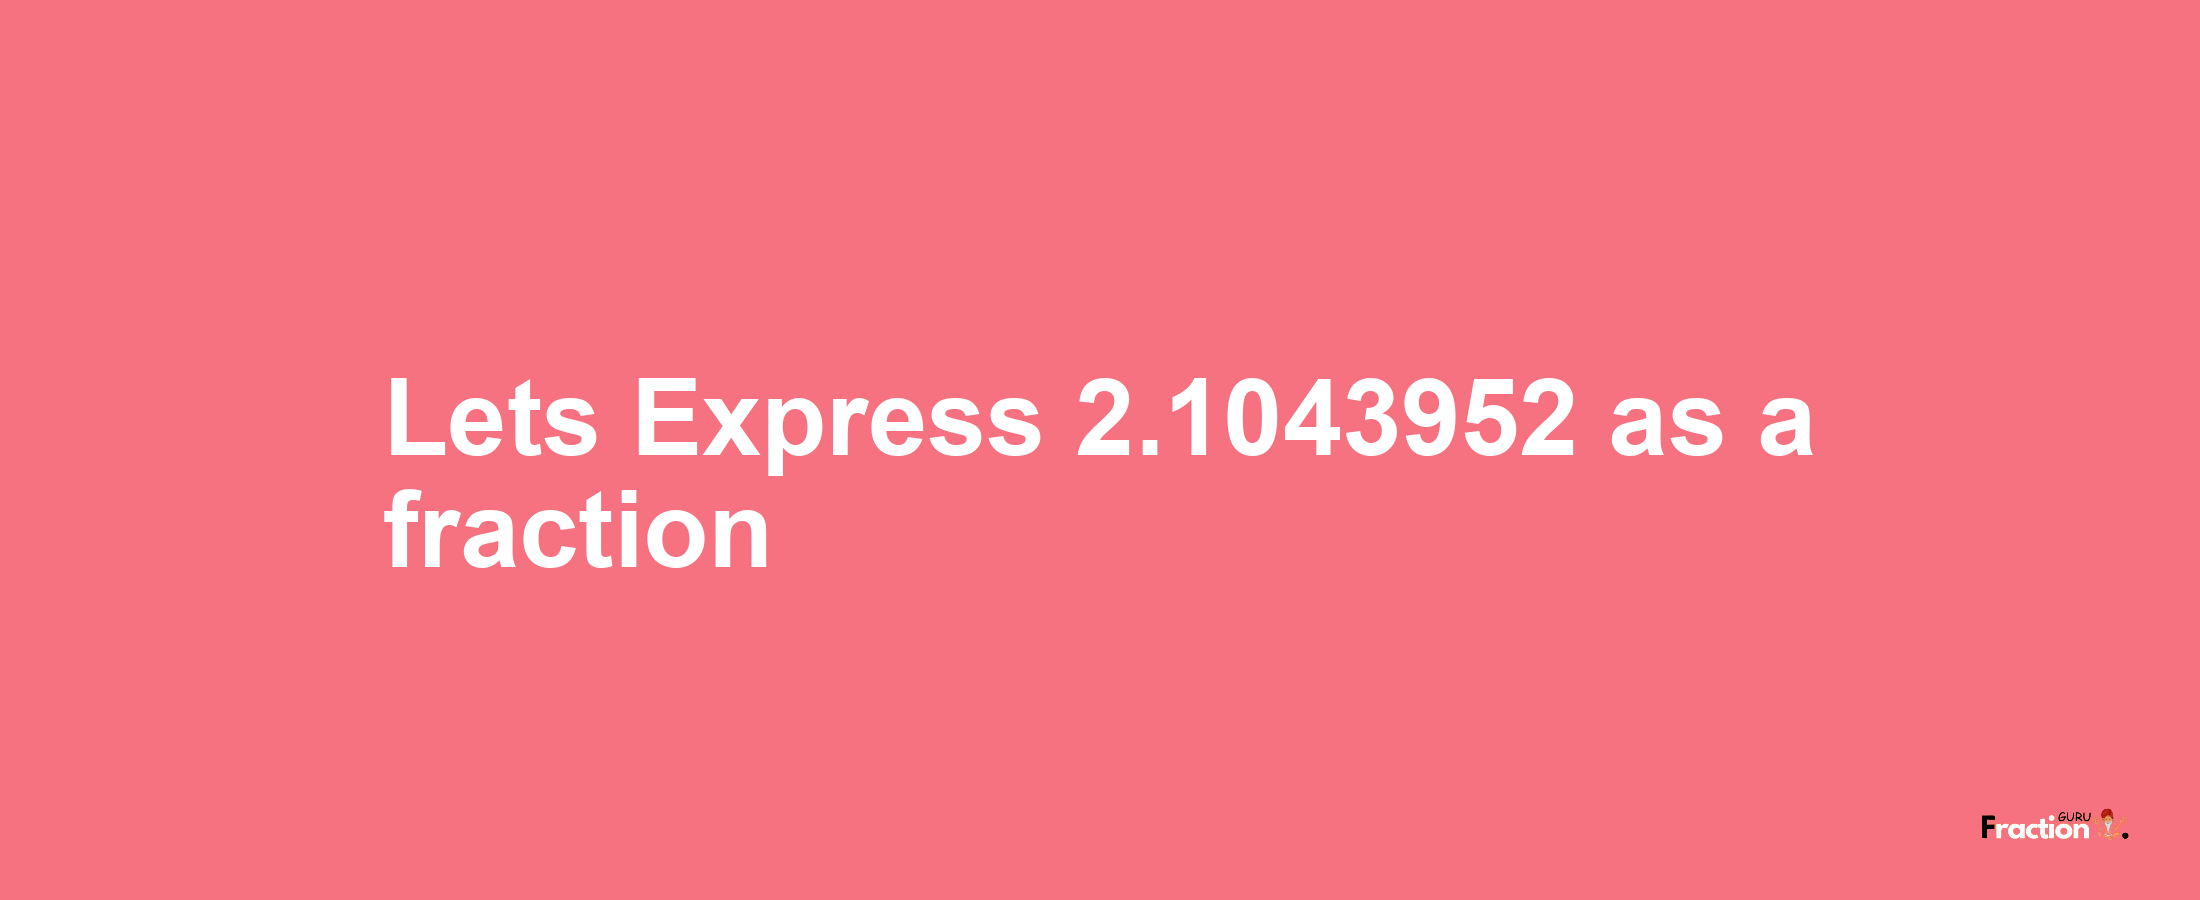 Lets Express 2.1043952 as afraction